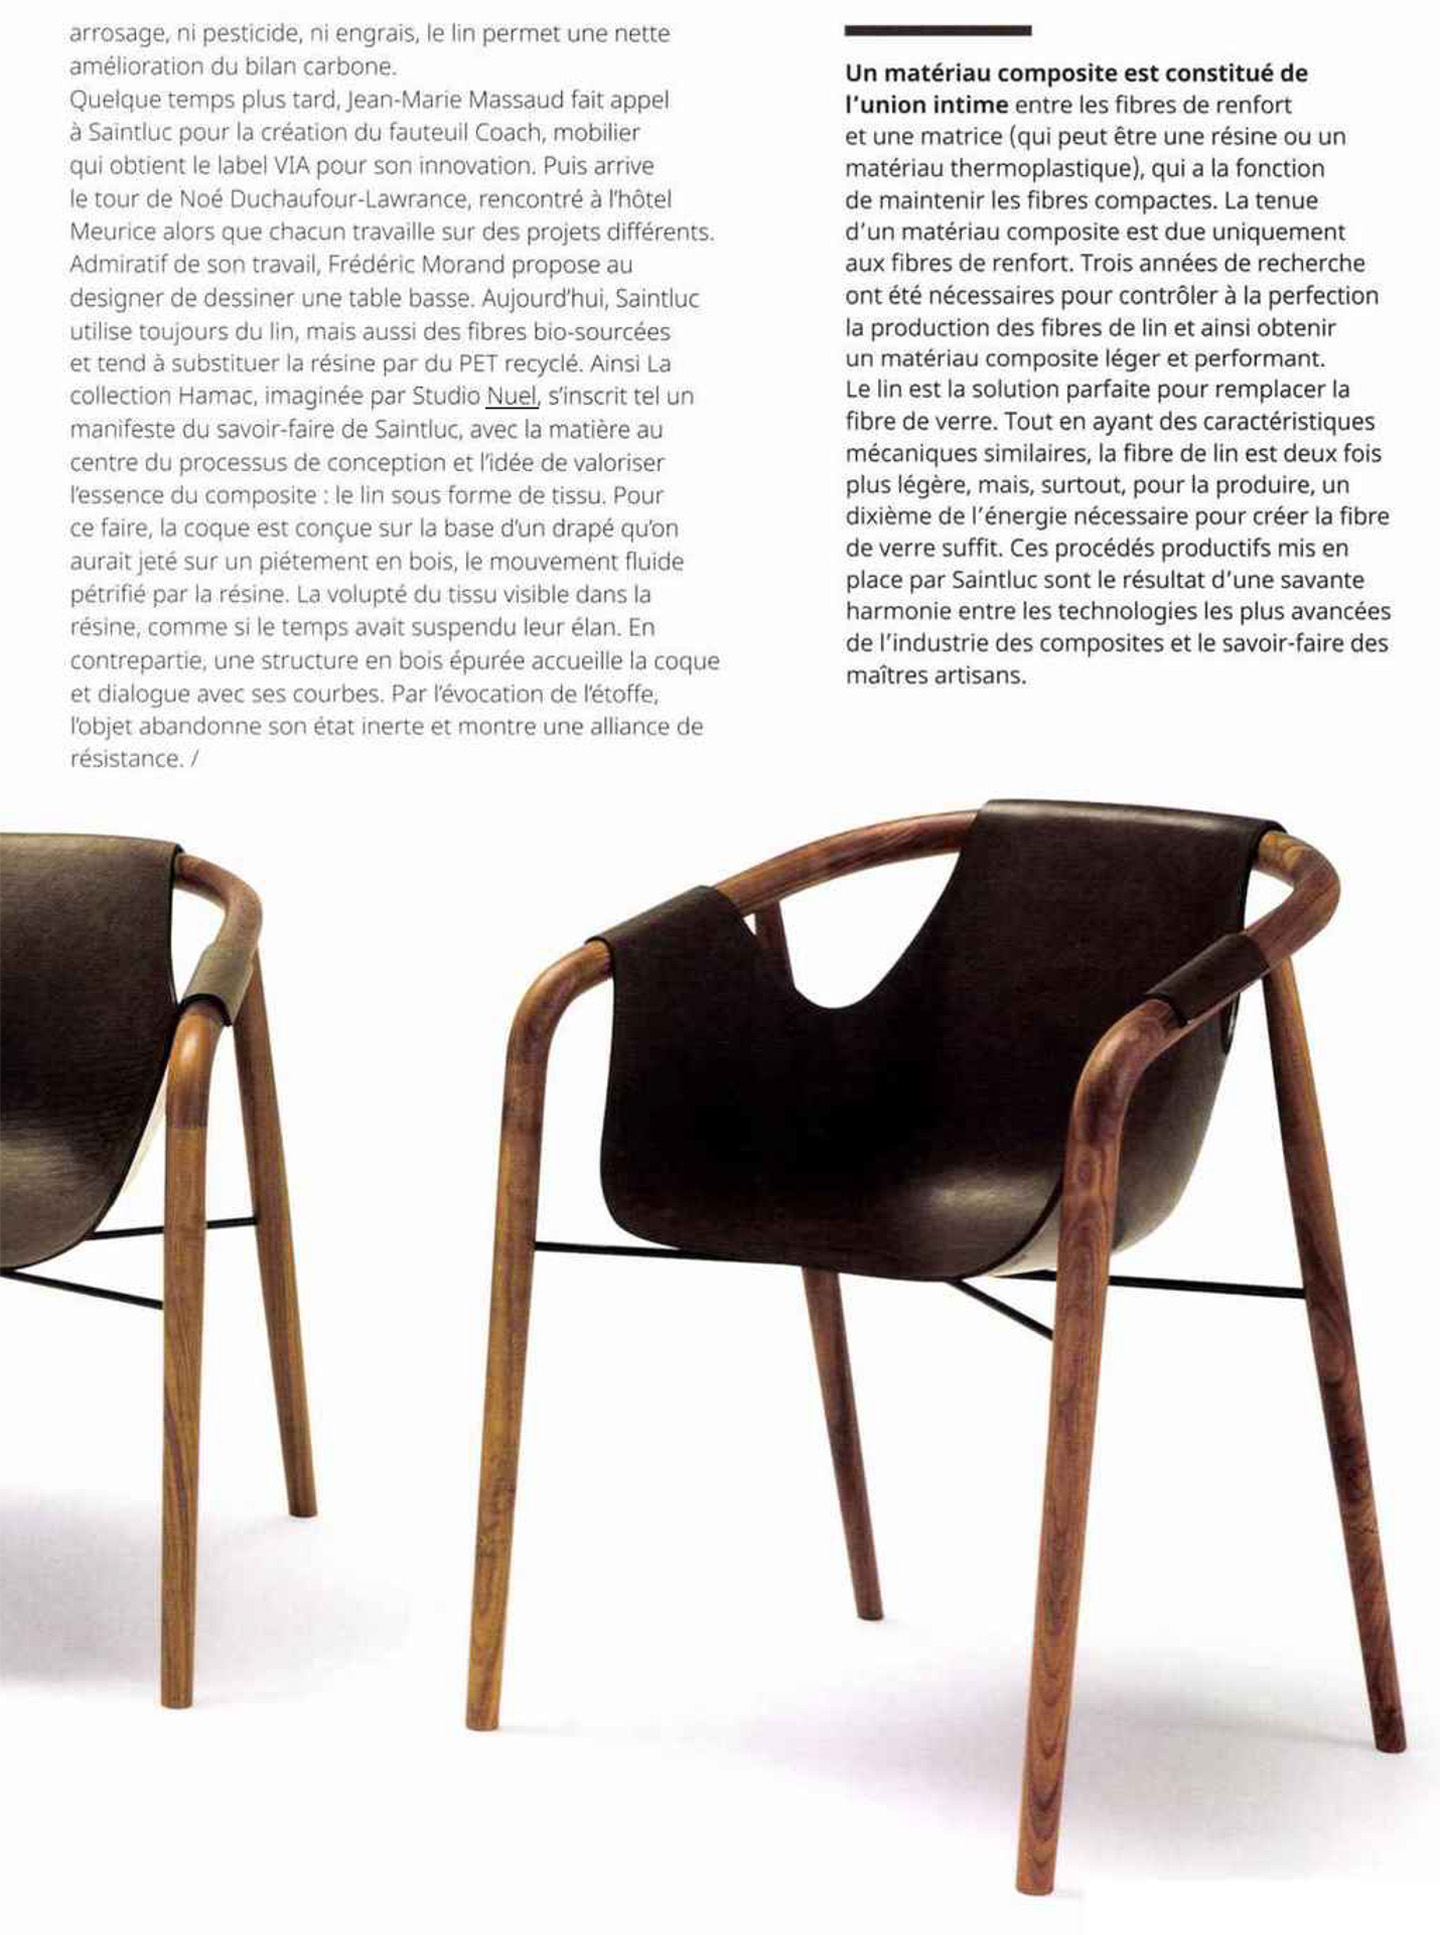 article on the collaboration between french interior designer jean-philippe nuel and saintluc for the creation of a range of seats made from linen fibers, object design